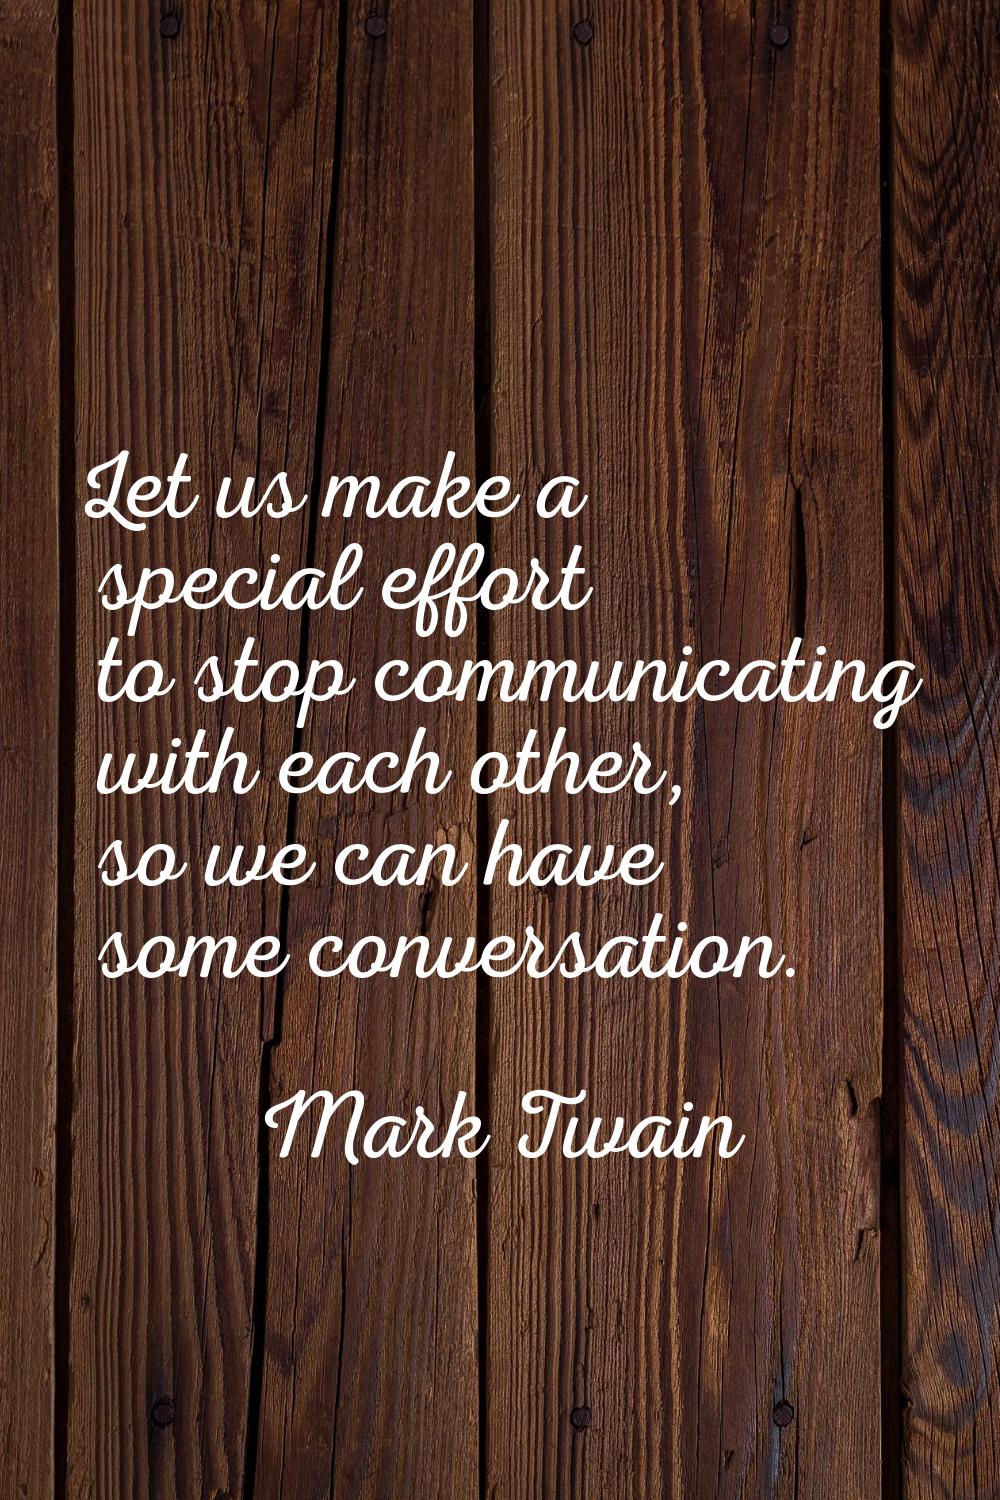 Let us make a special effort to stop communicating with each other, so we can have some conversatio